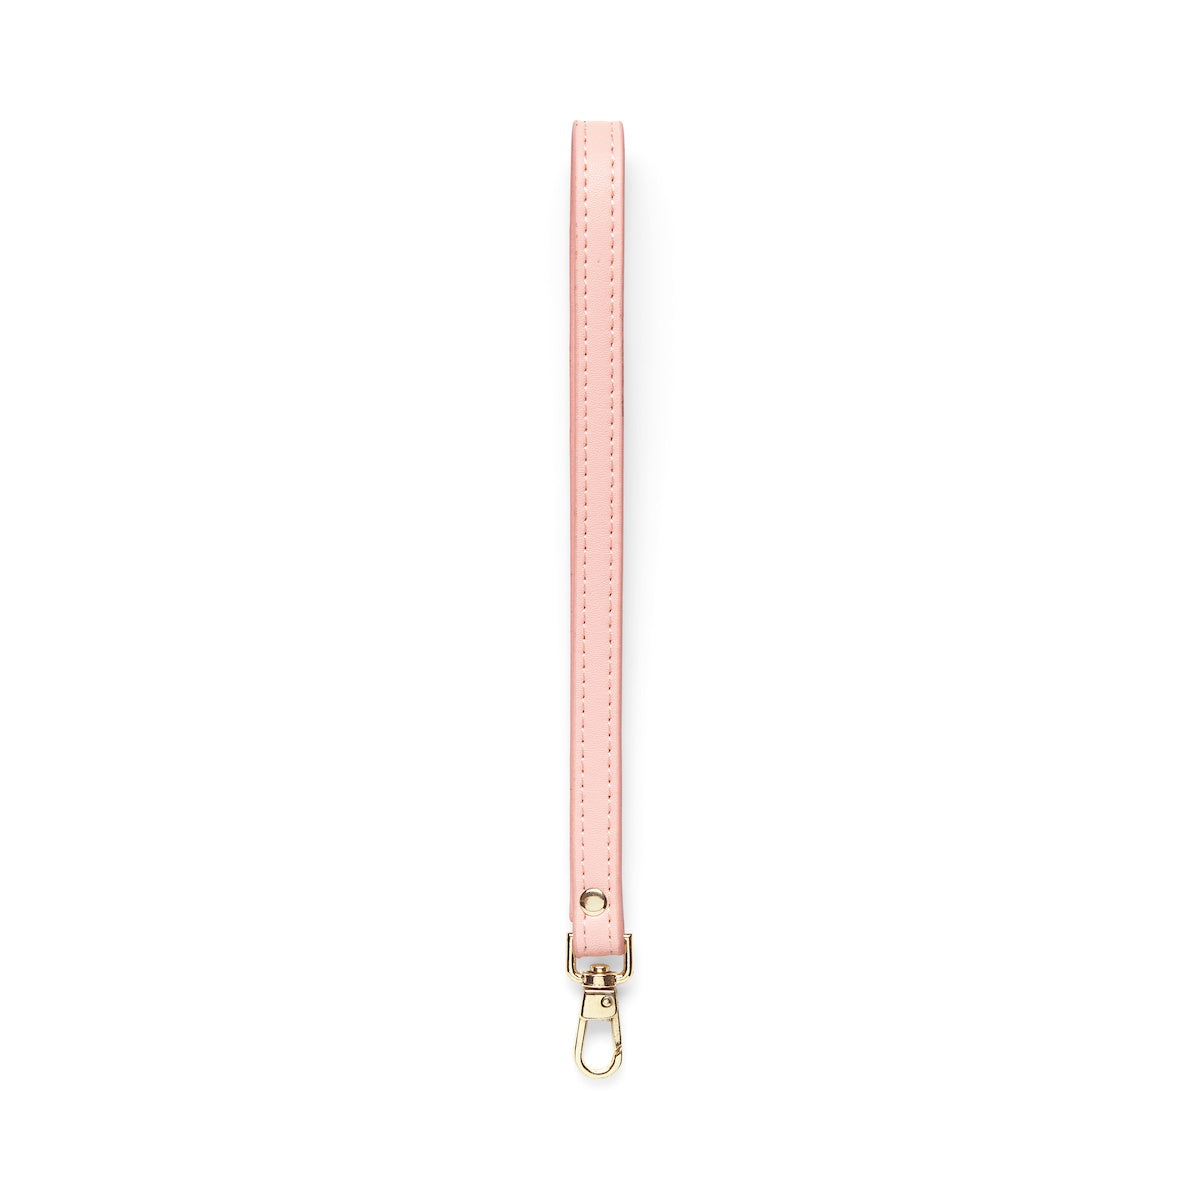 Smooth Leather Wrist Strap - Pale Pink